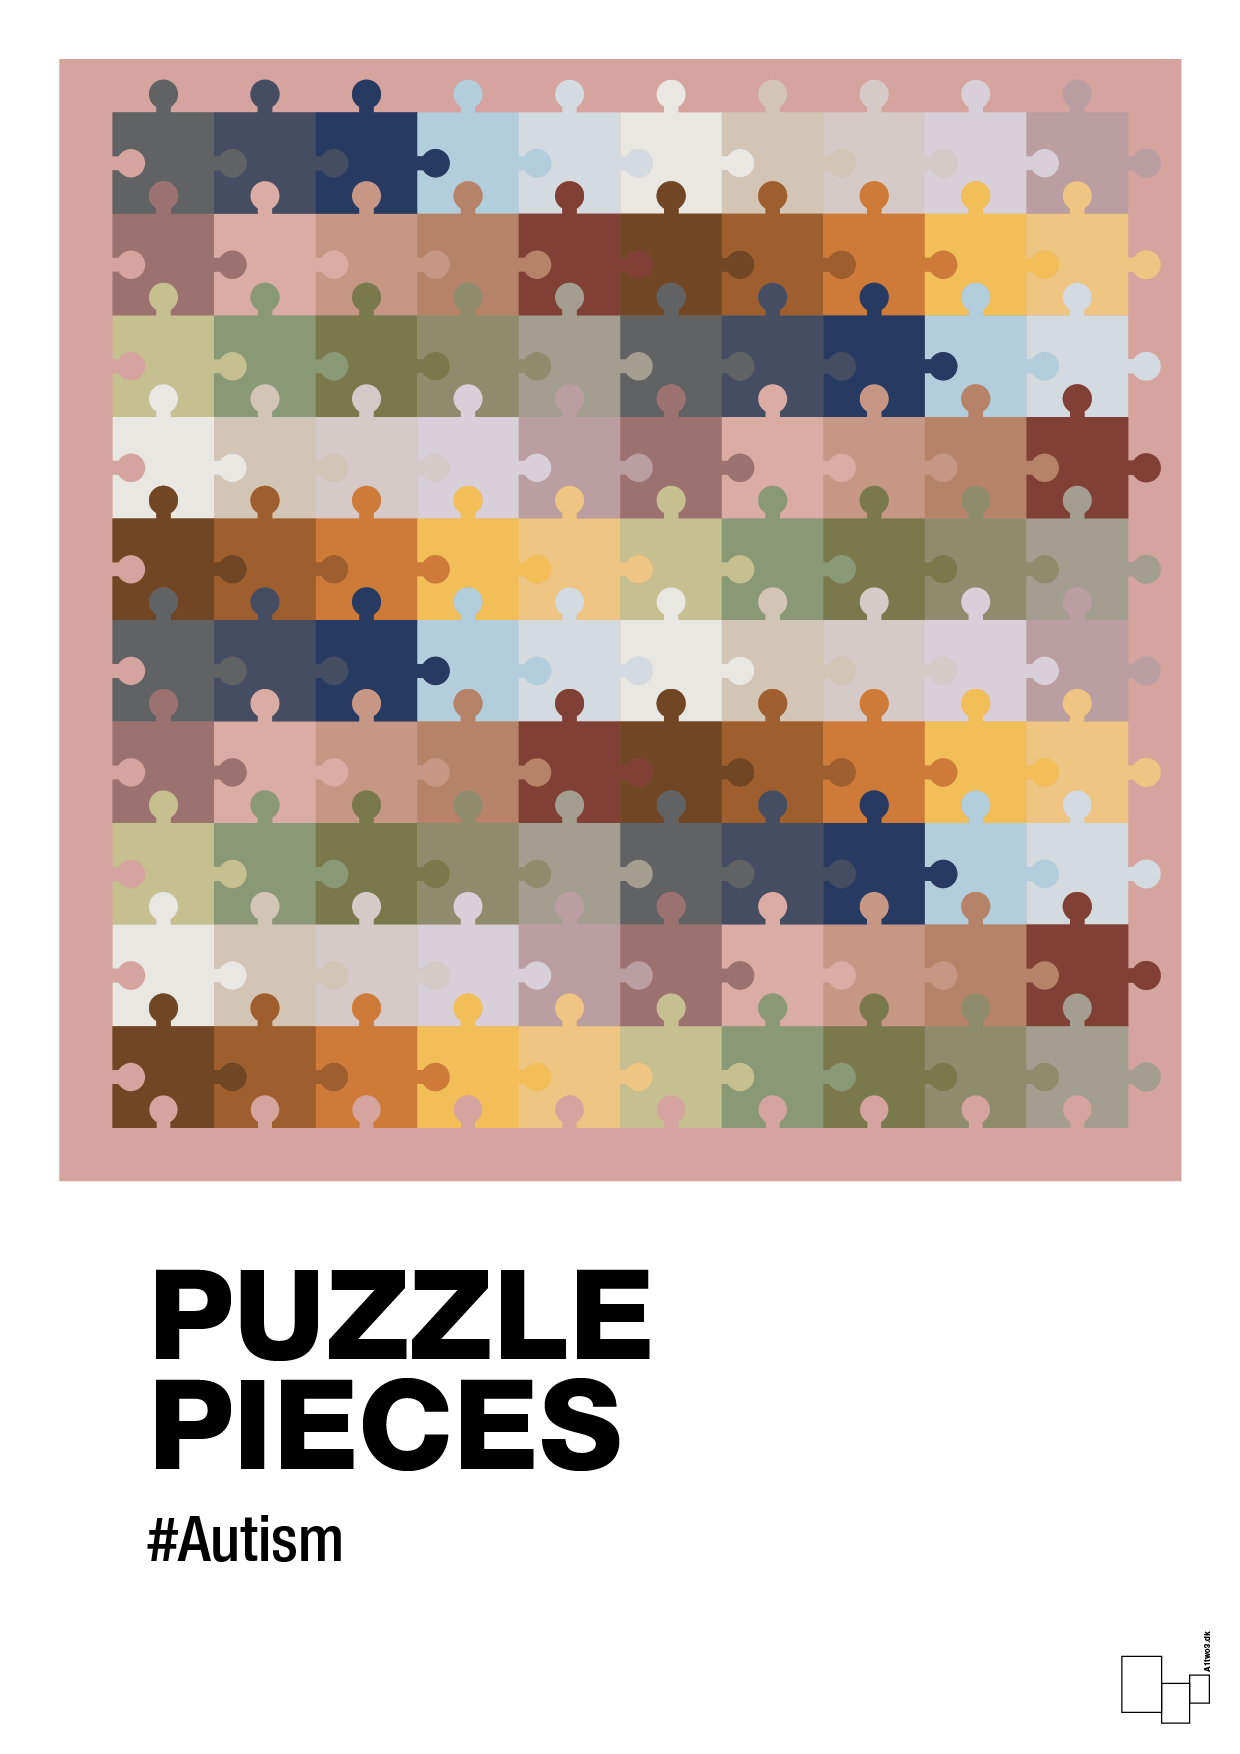 puzzle pieces - Plakat med Samfund i Bubble Shell